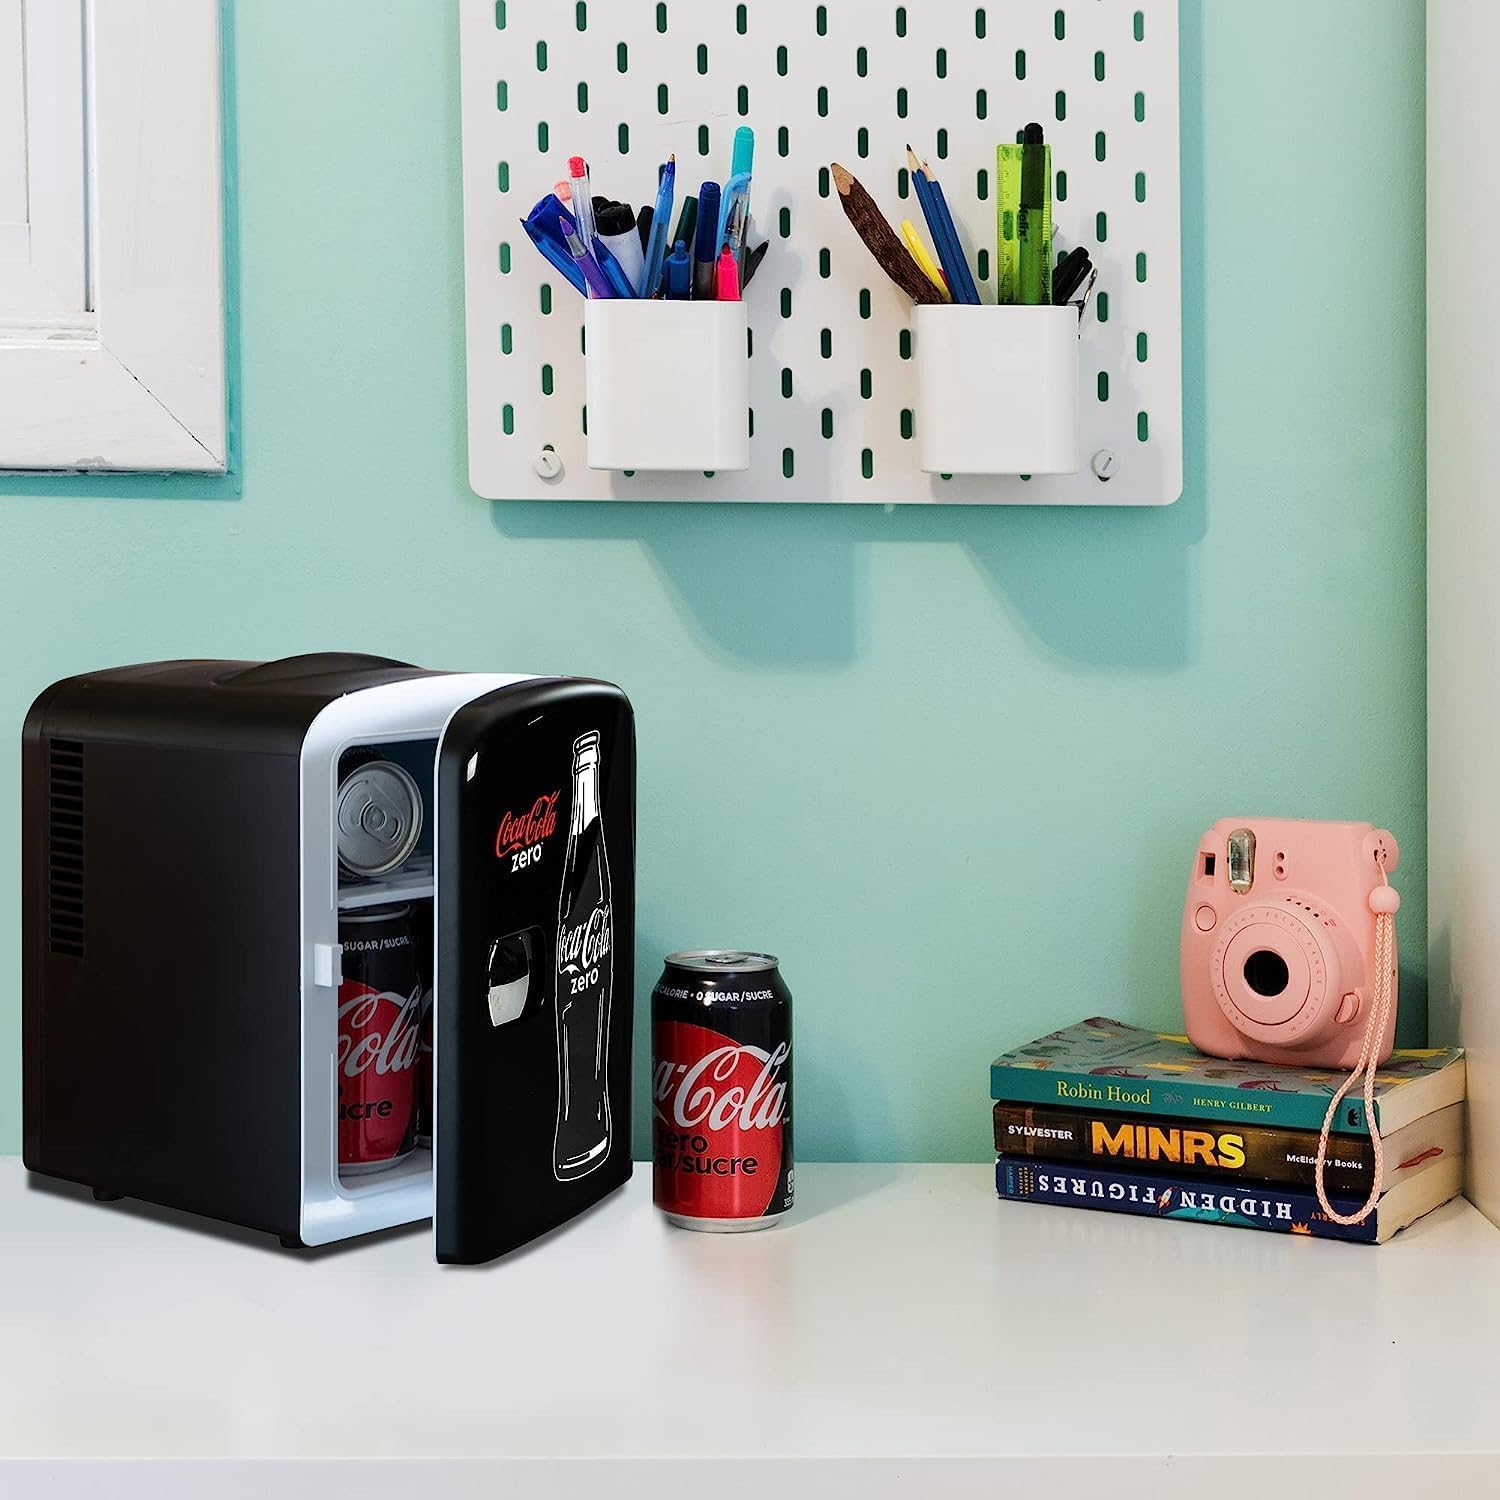 Coca-Cola Zero CZ04 4 Liter/4.2 Quarts 6 Can Portable Cooler/Mini Fridge, Beverages, Baby Food, Skincare and Medications-Use at Home, Office, Dorm, Car, RV or Boat-AC & DC Plugs Included, Black/Red